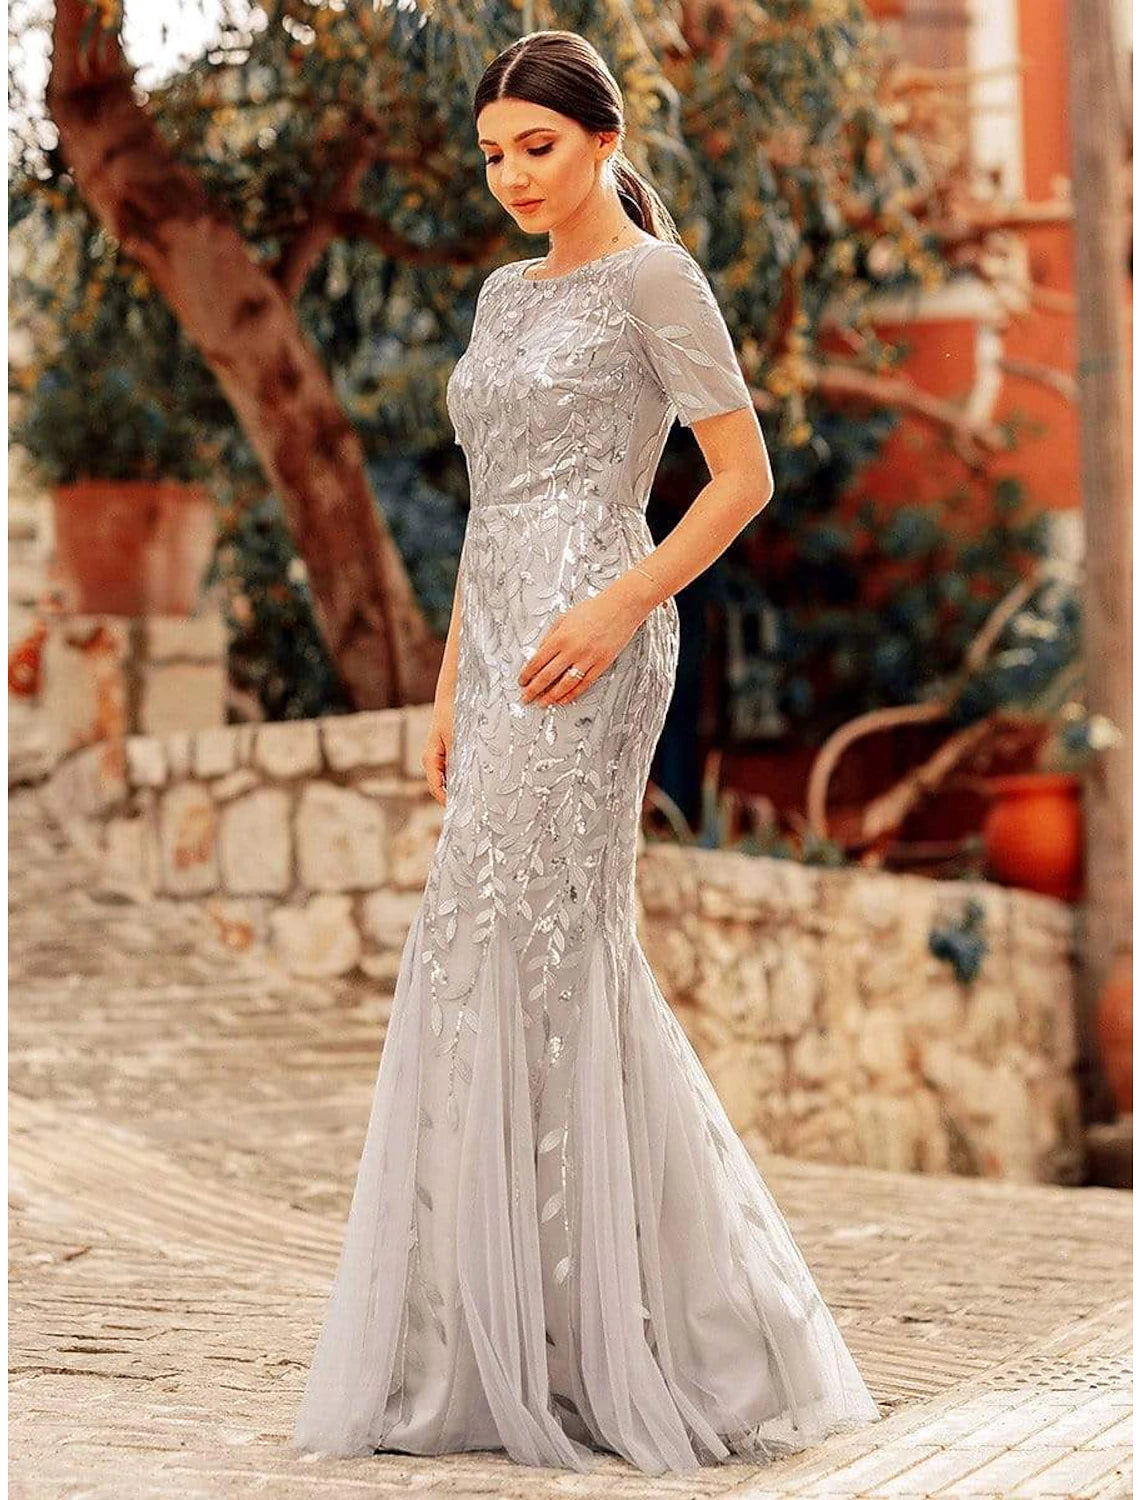 Mermaid / Trumpet Evening Gown Empire Dress Wedding Guest Floor Length Short Sleeve Jewel Neck Bridesmaid Dress Tulle with Embroidery